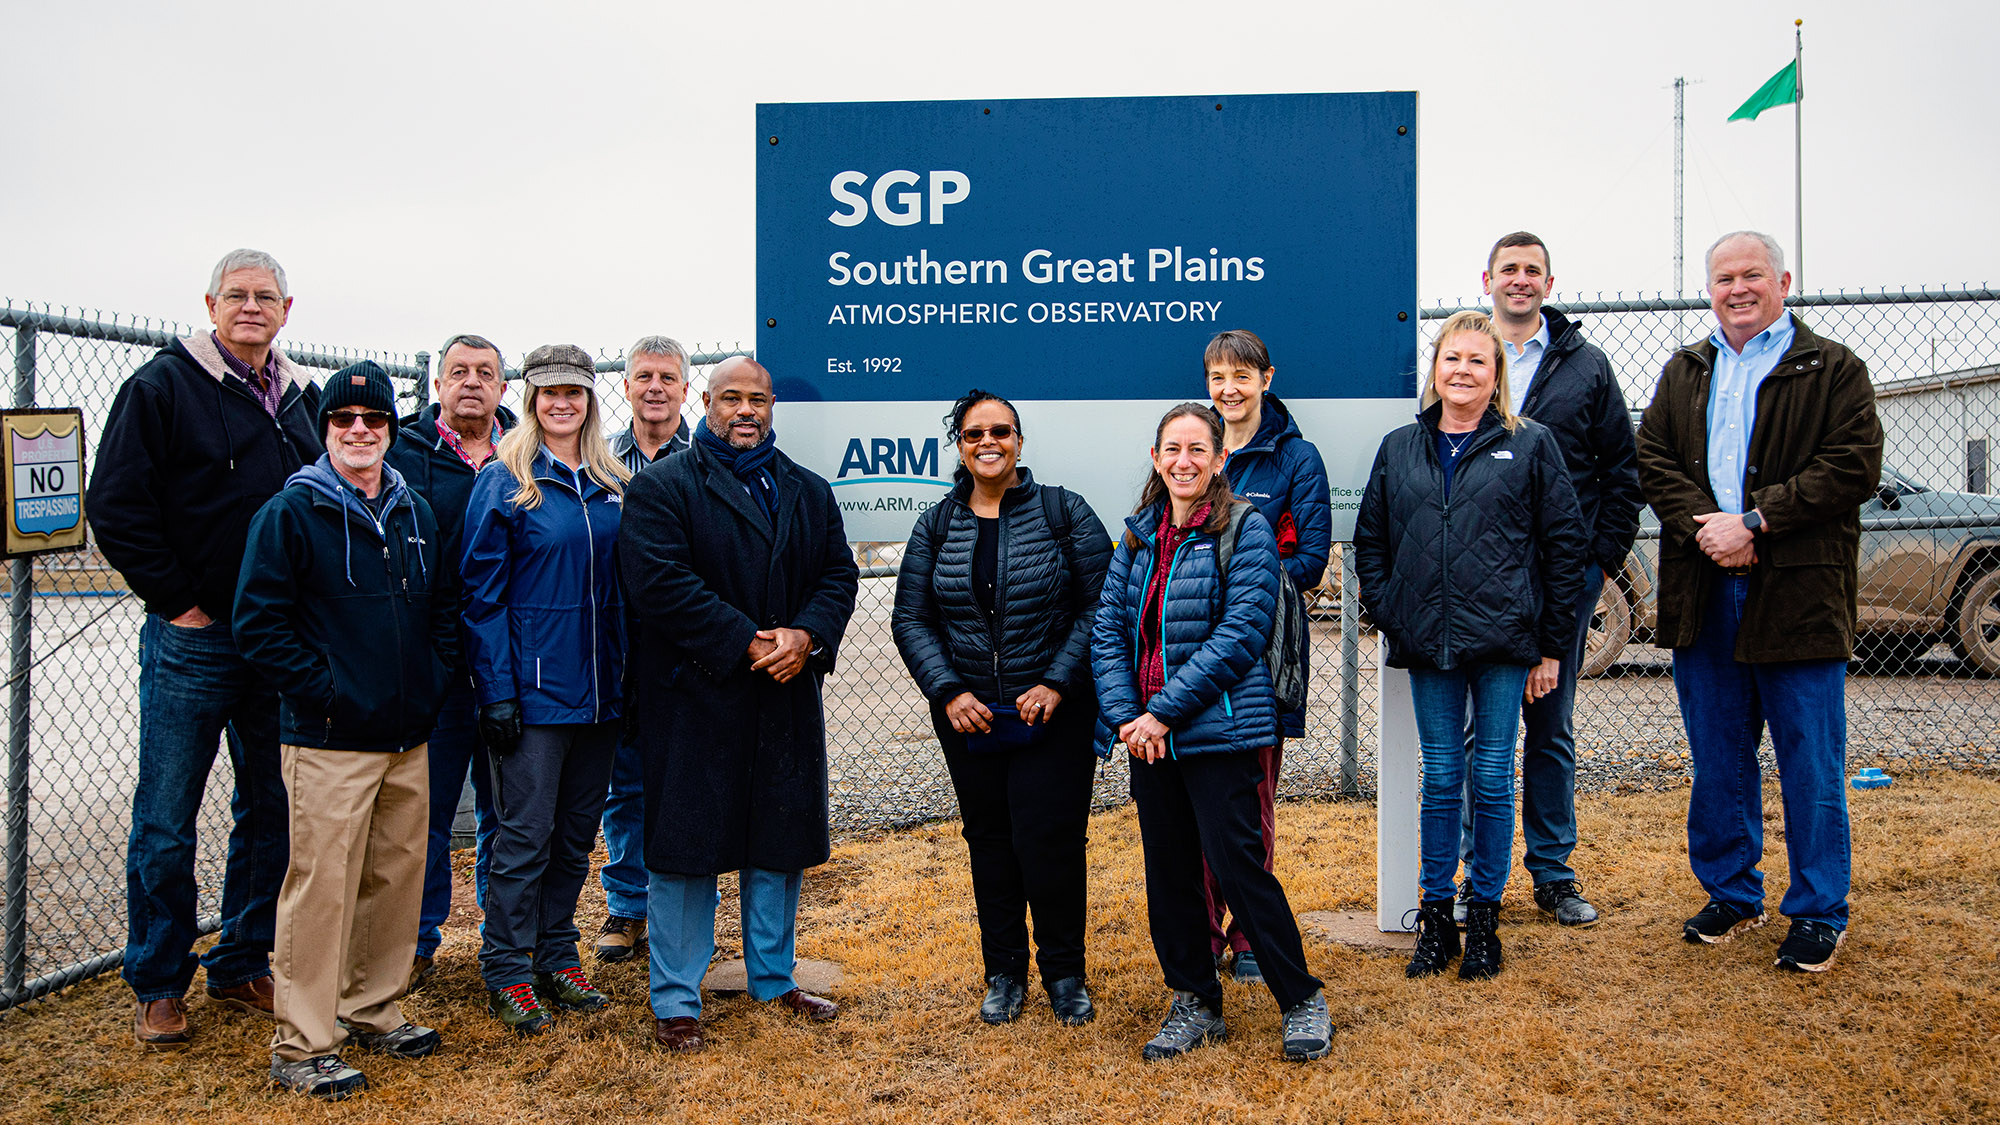 Group of visitors stands near sign for the Southern Great Plains atmospheric observatory